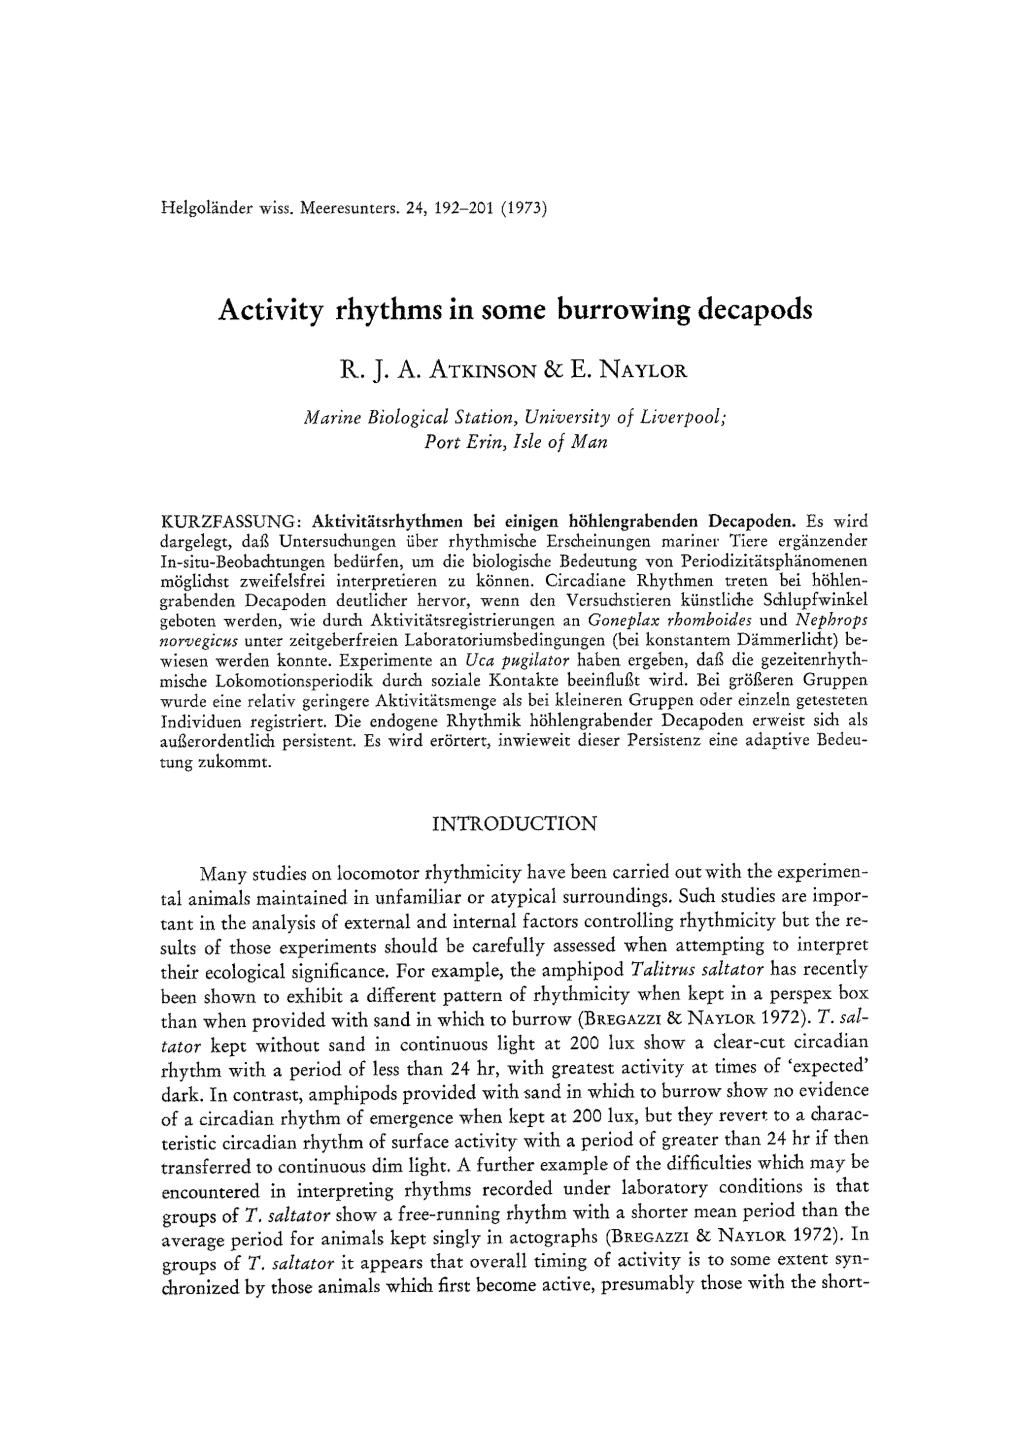 Activity Rhythms in Some Burrowing Decapods